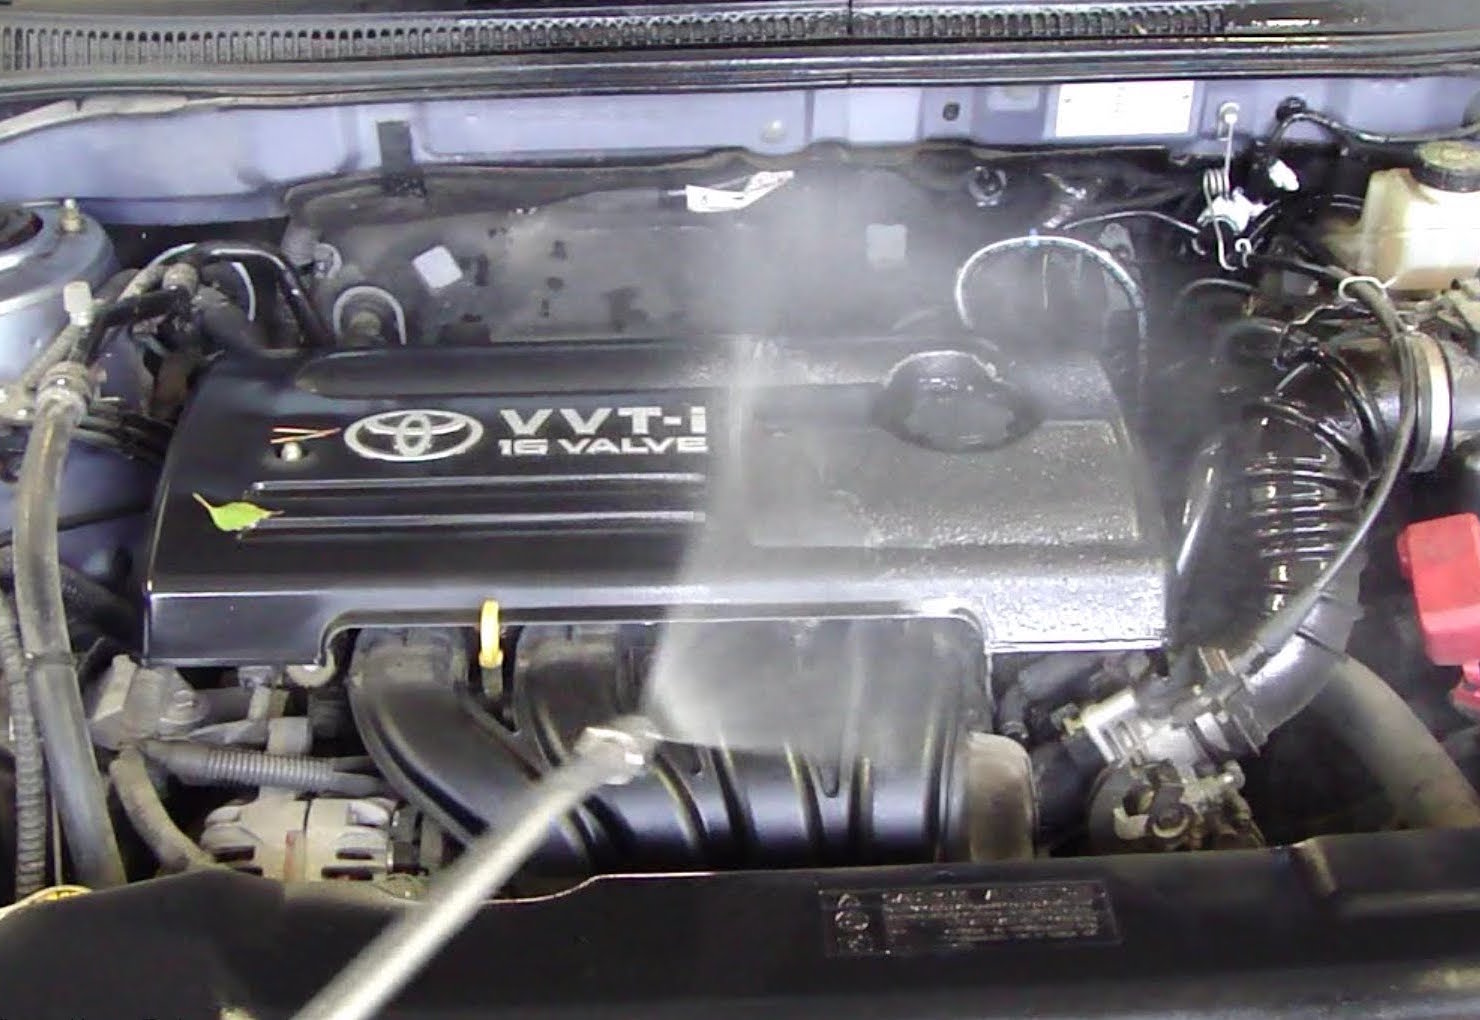 How to clean your car engine